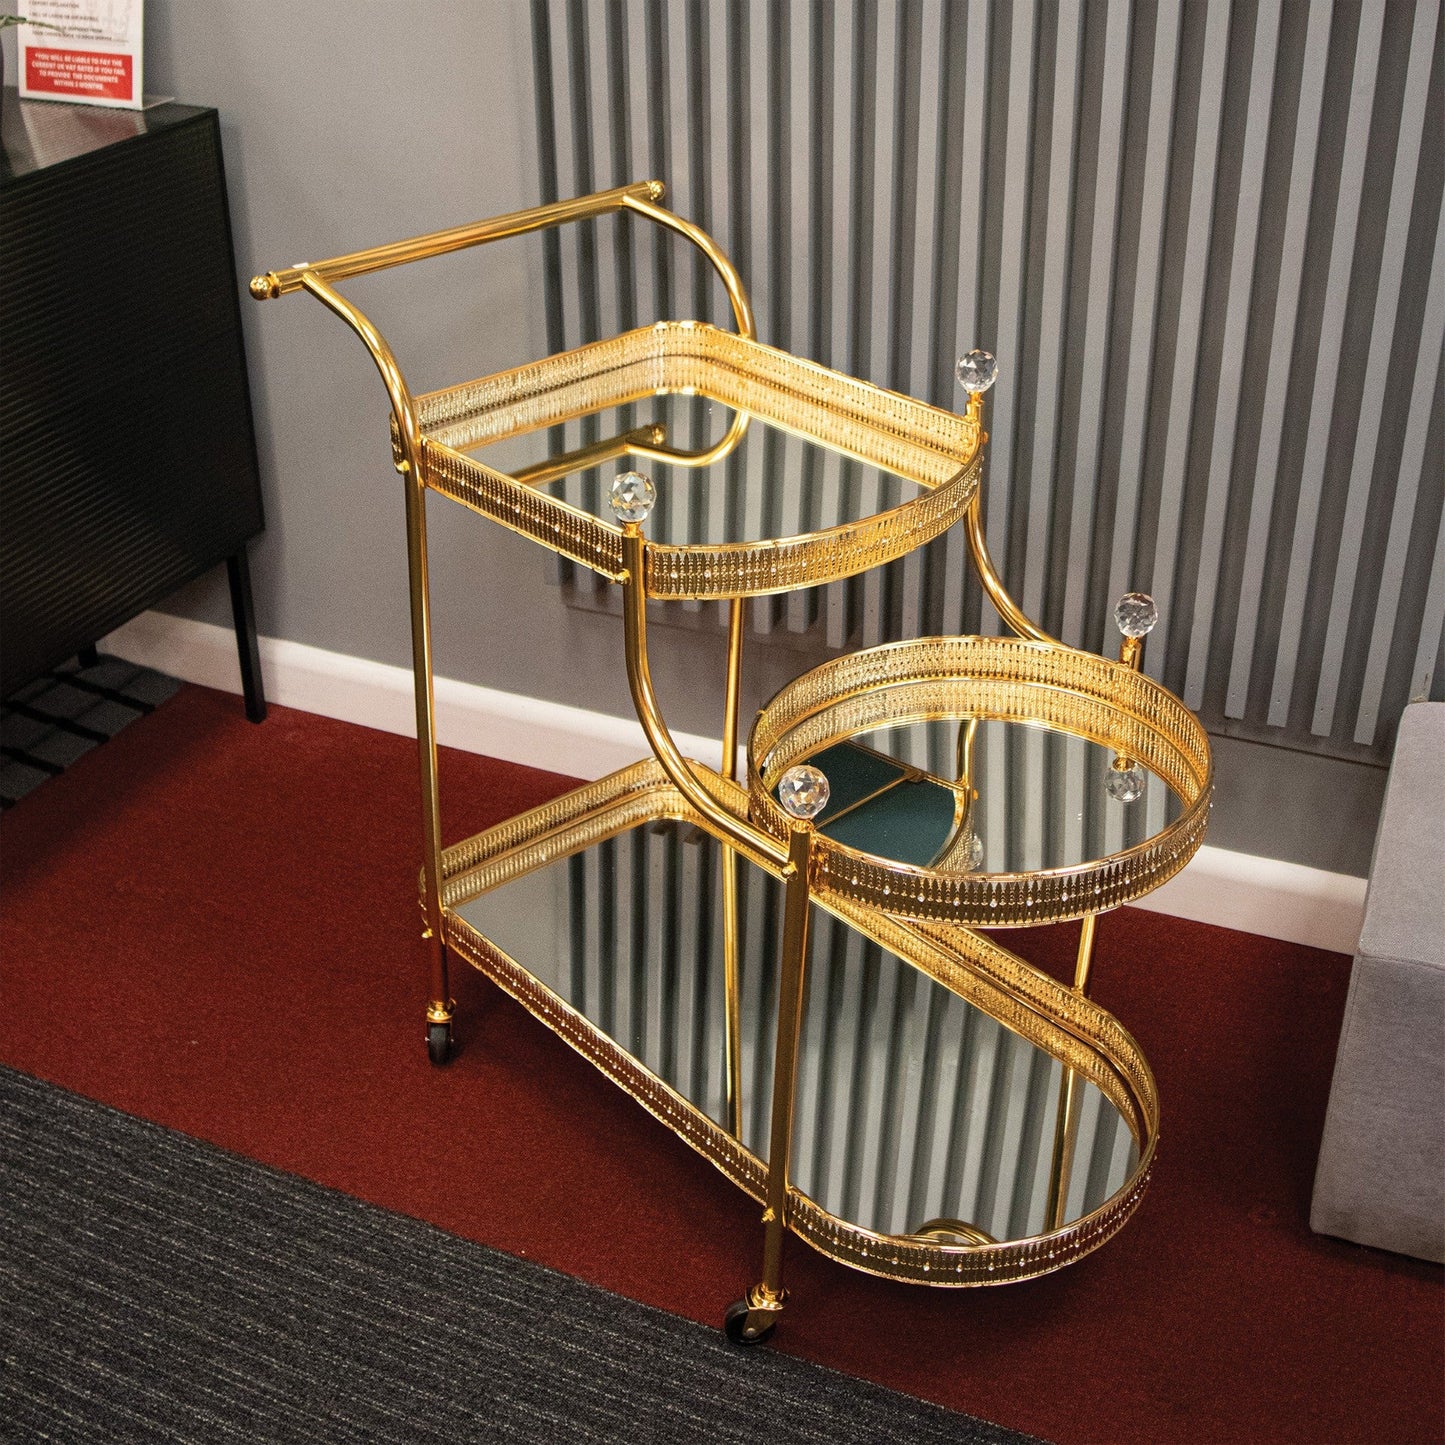 SQ Professional Durane Kitchen Bar Cart Trolley with Mirror Trays 3 Tier 50.5 x 75 x 82 cm Gold 8436 (Big Parcel Rate)